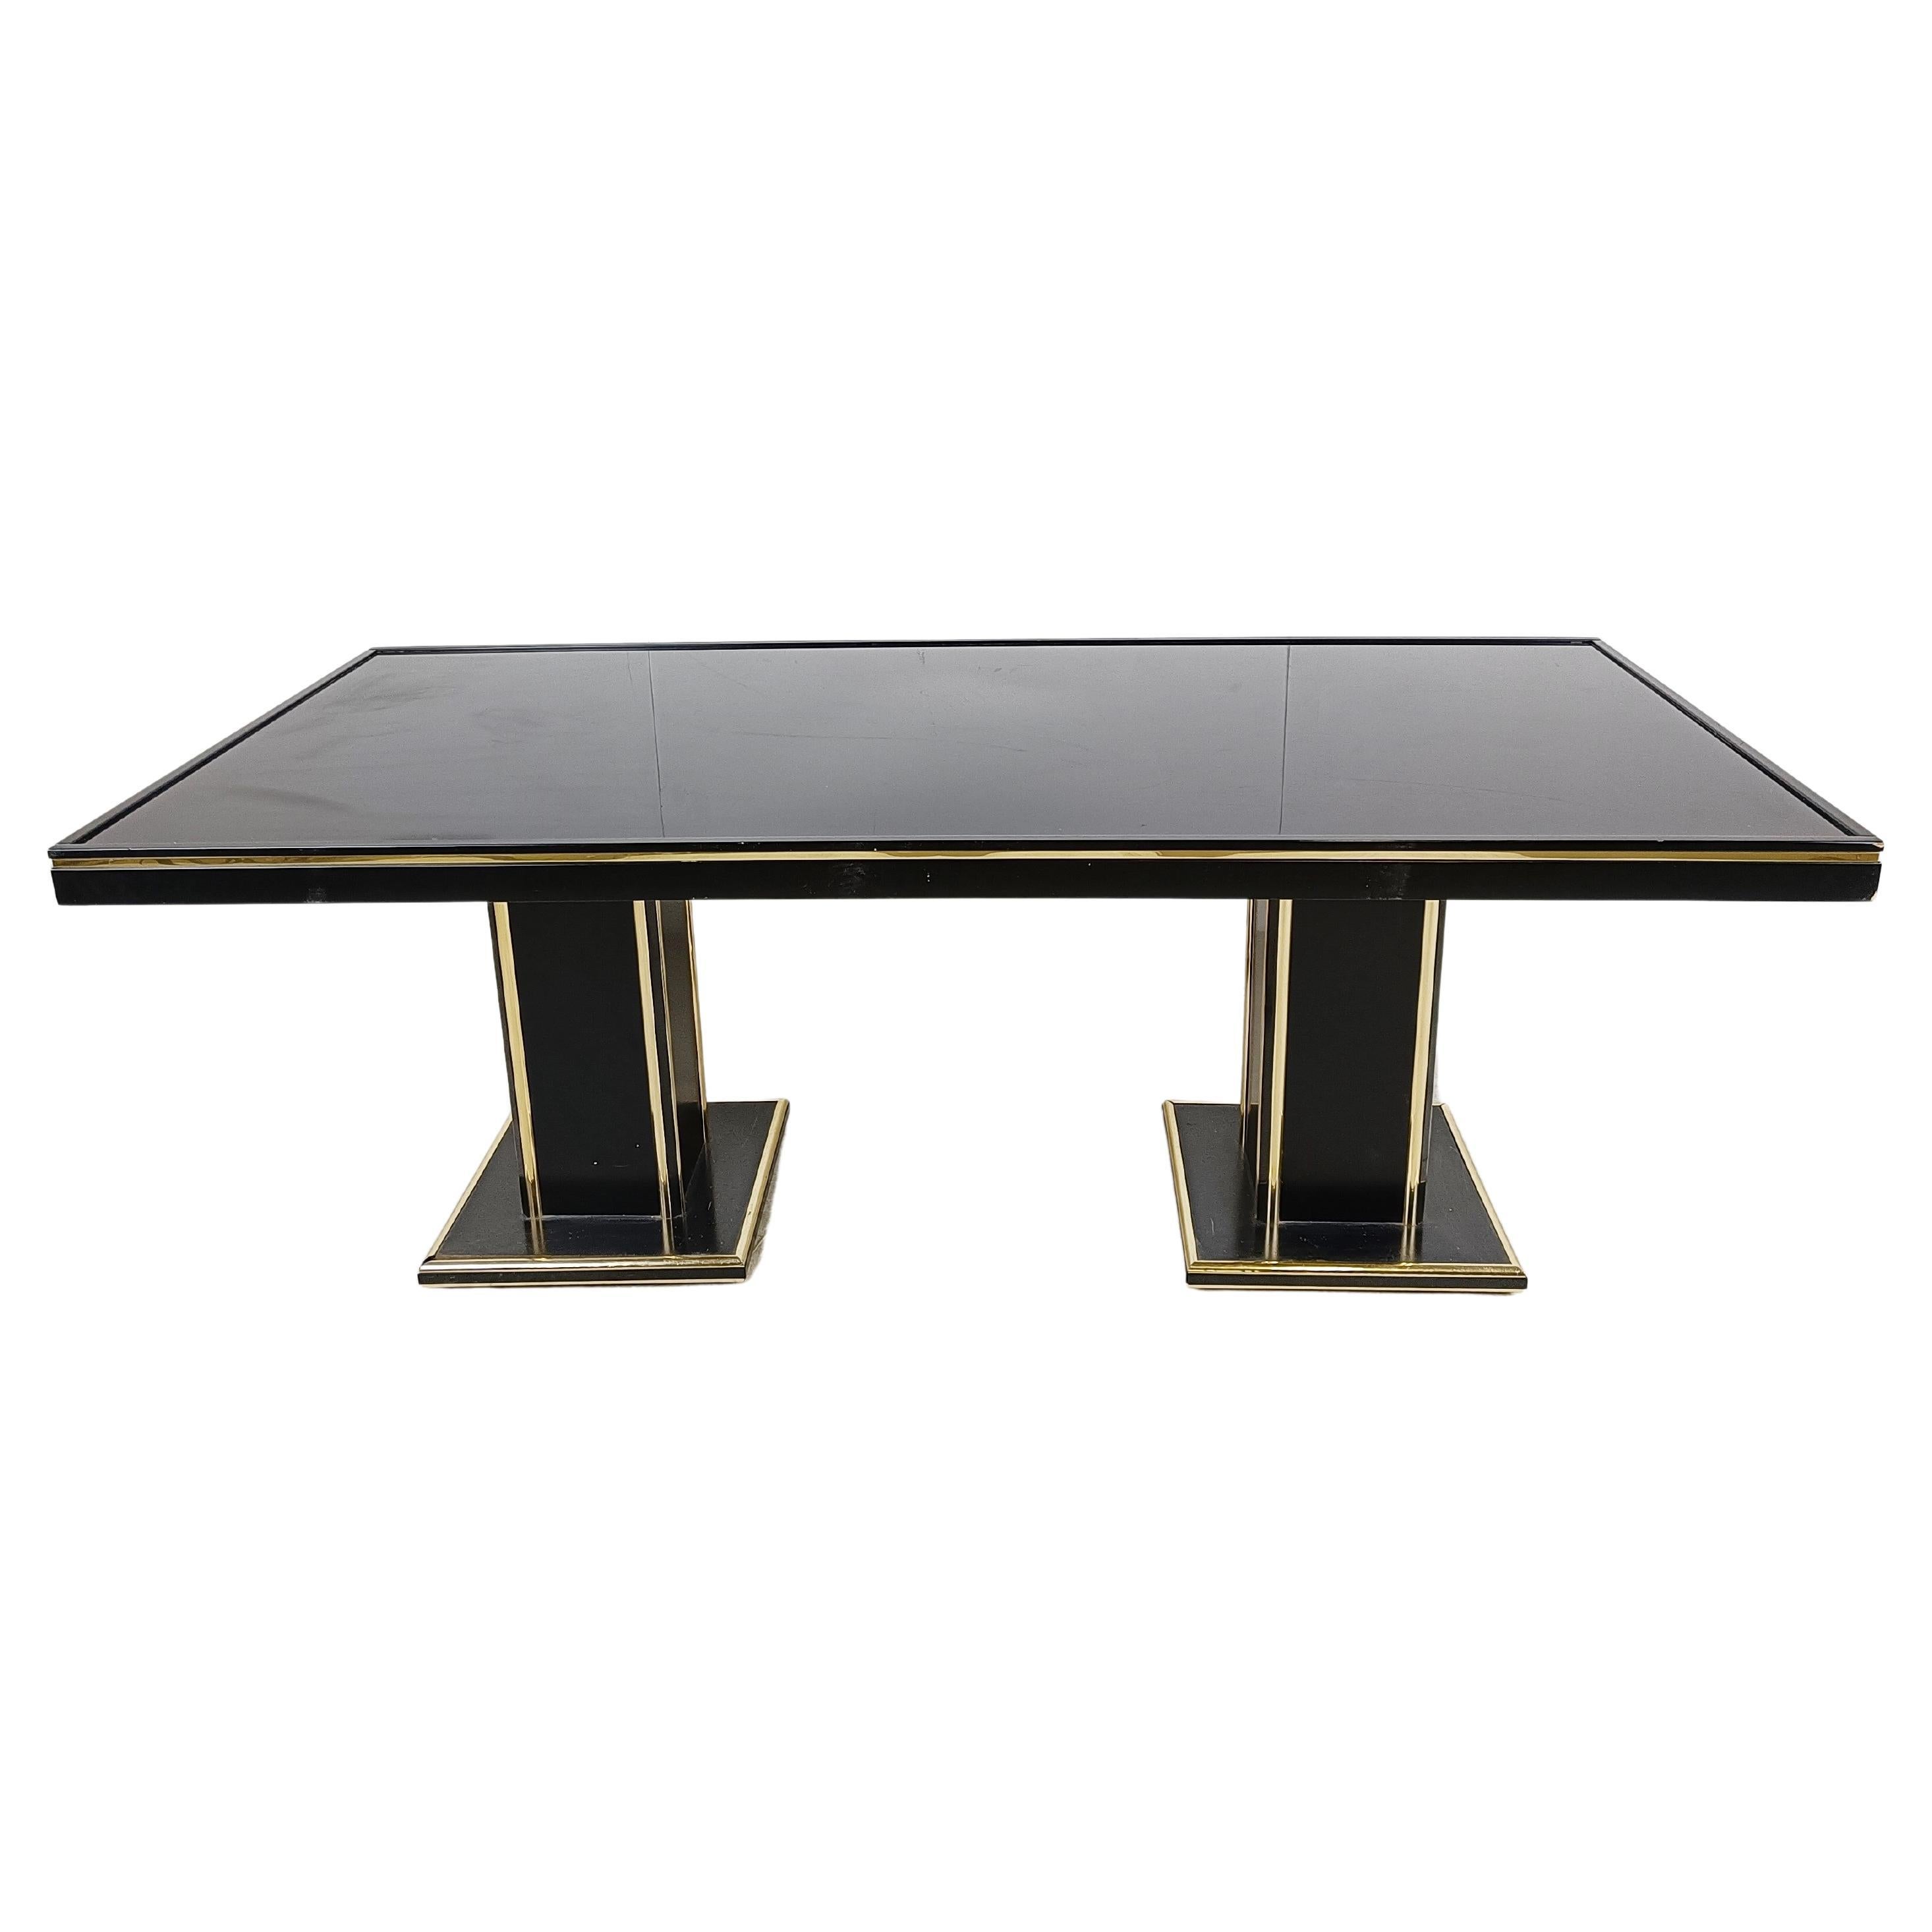 Vintage lacquer and brass dining table, 1970s For Sale